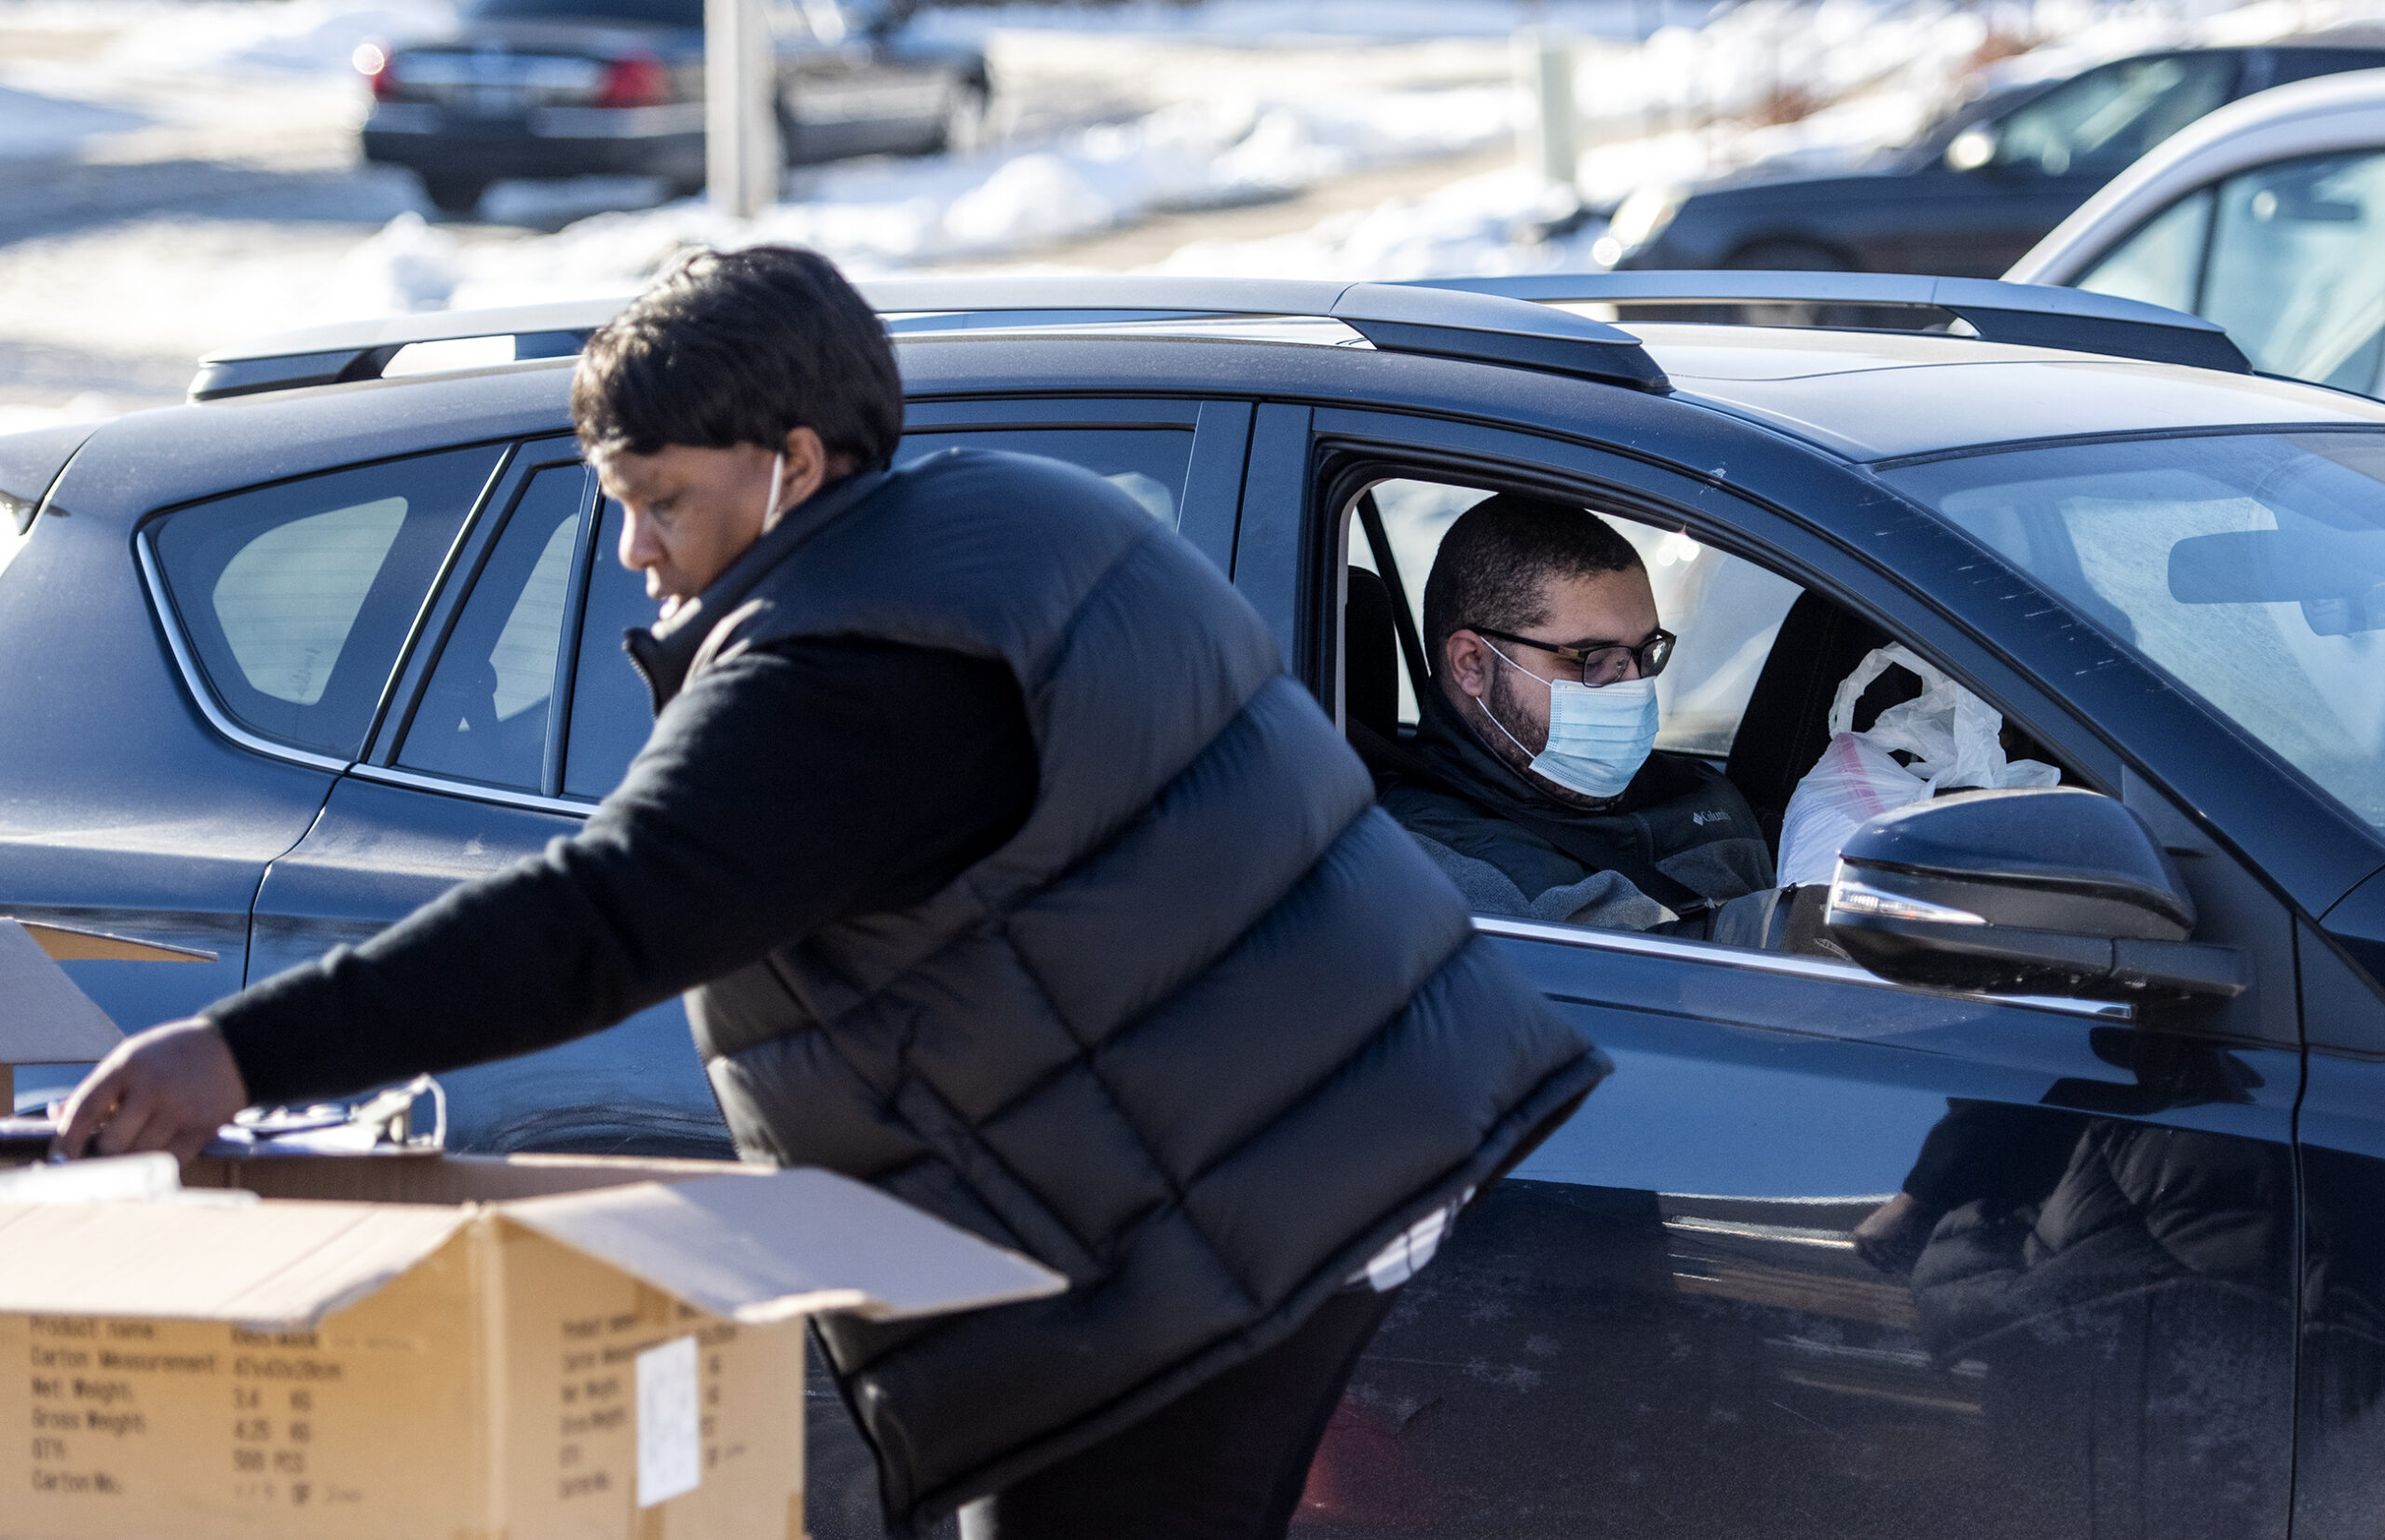 A driver wearing a face mask sits in a car as a woman delivers a bag of masks to him.